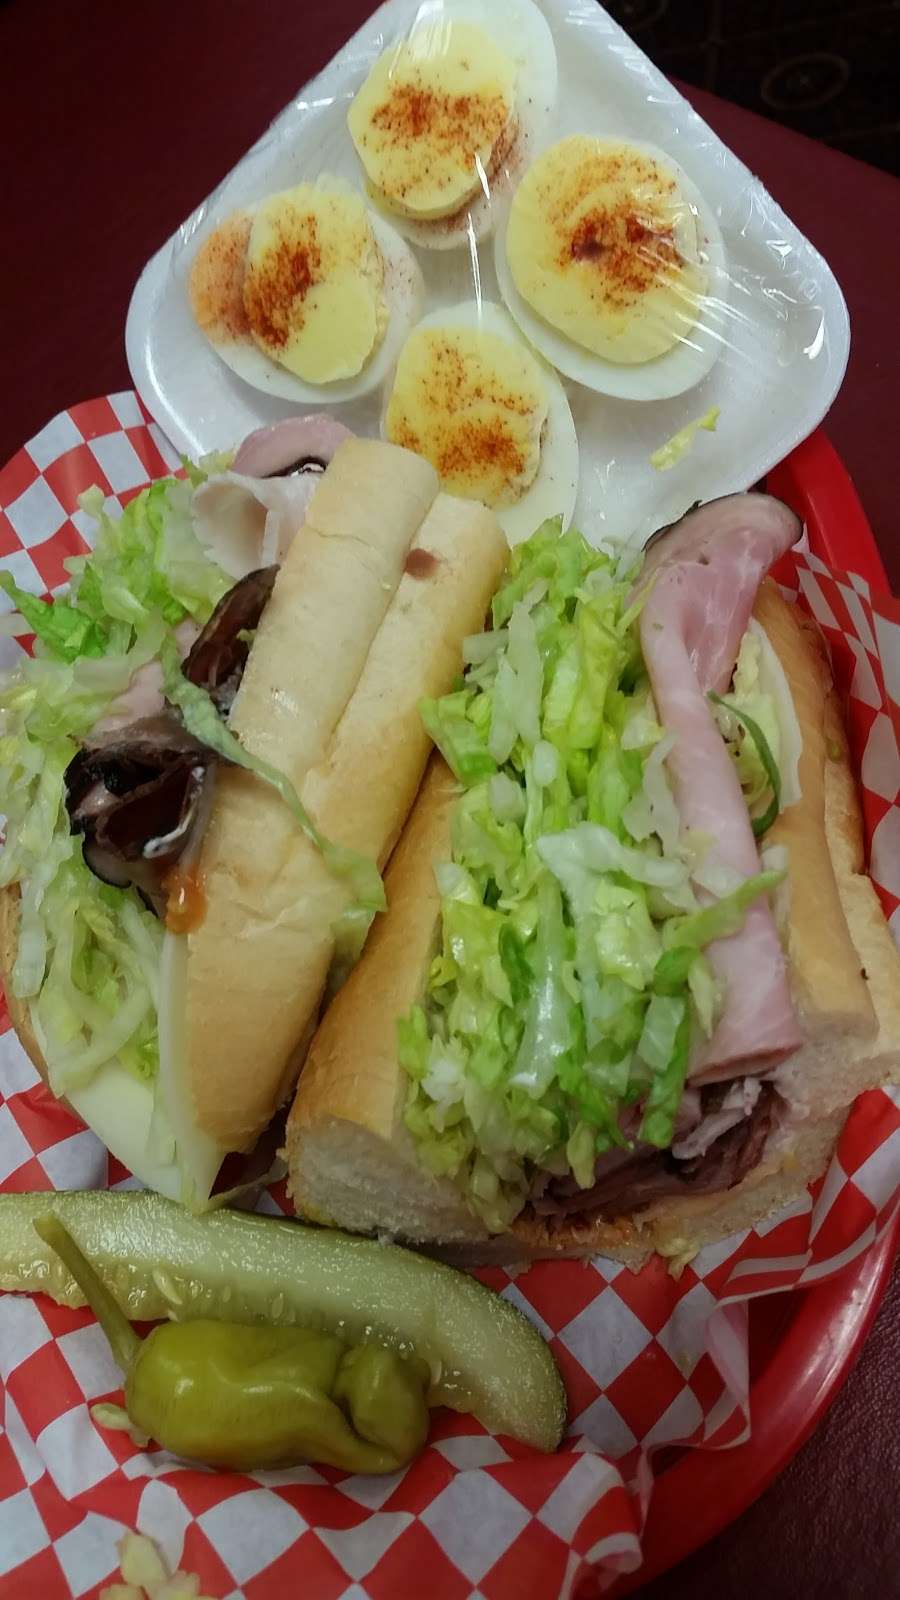 Norcos Famous Sixth Street Deli and Grill | 1261 Sixth St, Norco, CA 92860 | Phone: (951) 279-2002